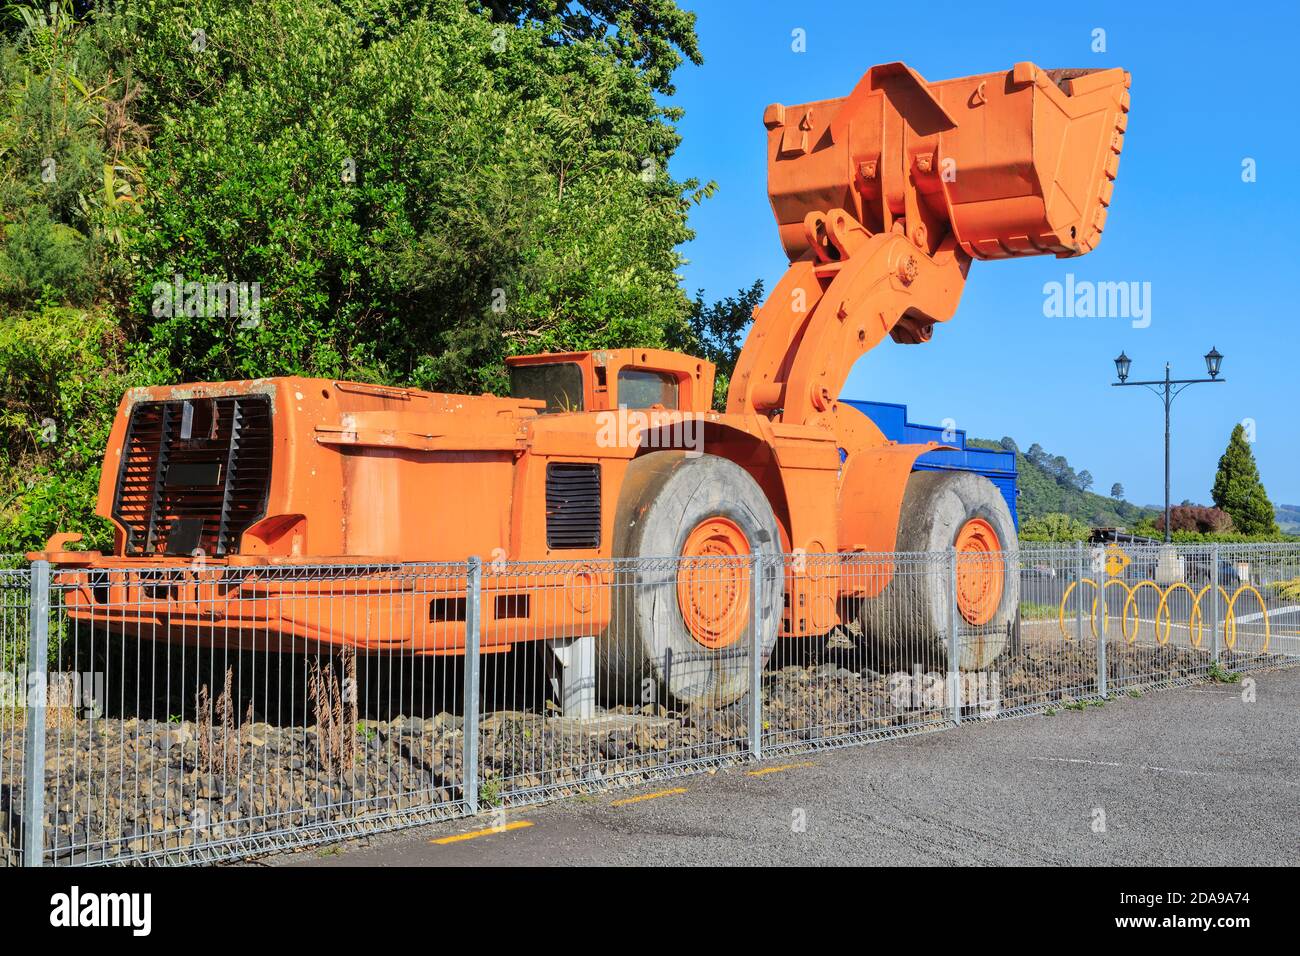 A giant front-end loader earth mover known as a 'bogger' on display in Waihi, New Zealand Stock Photo